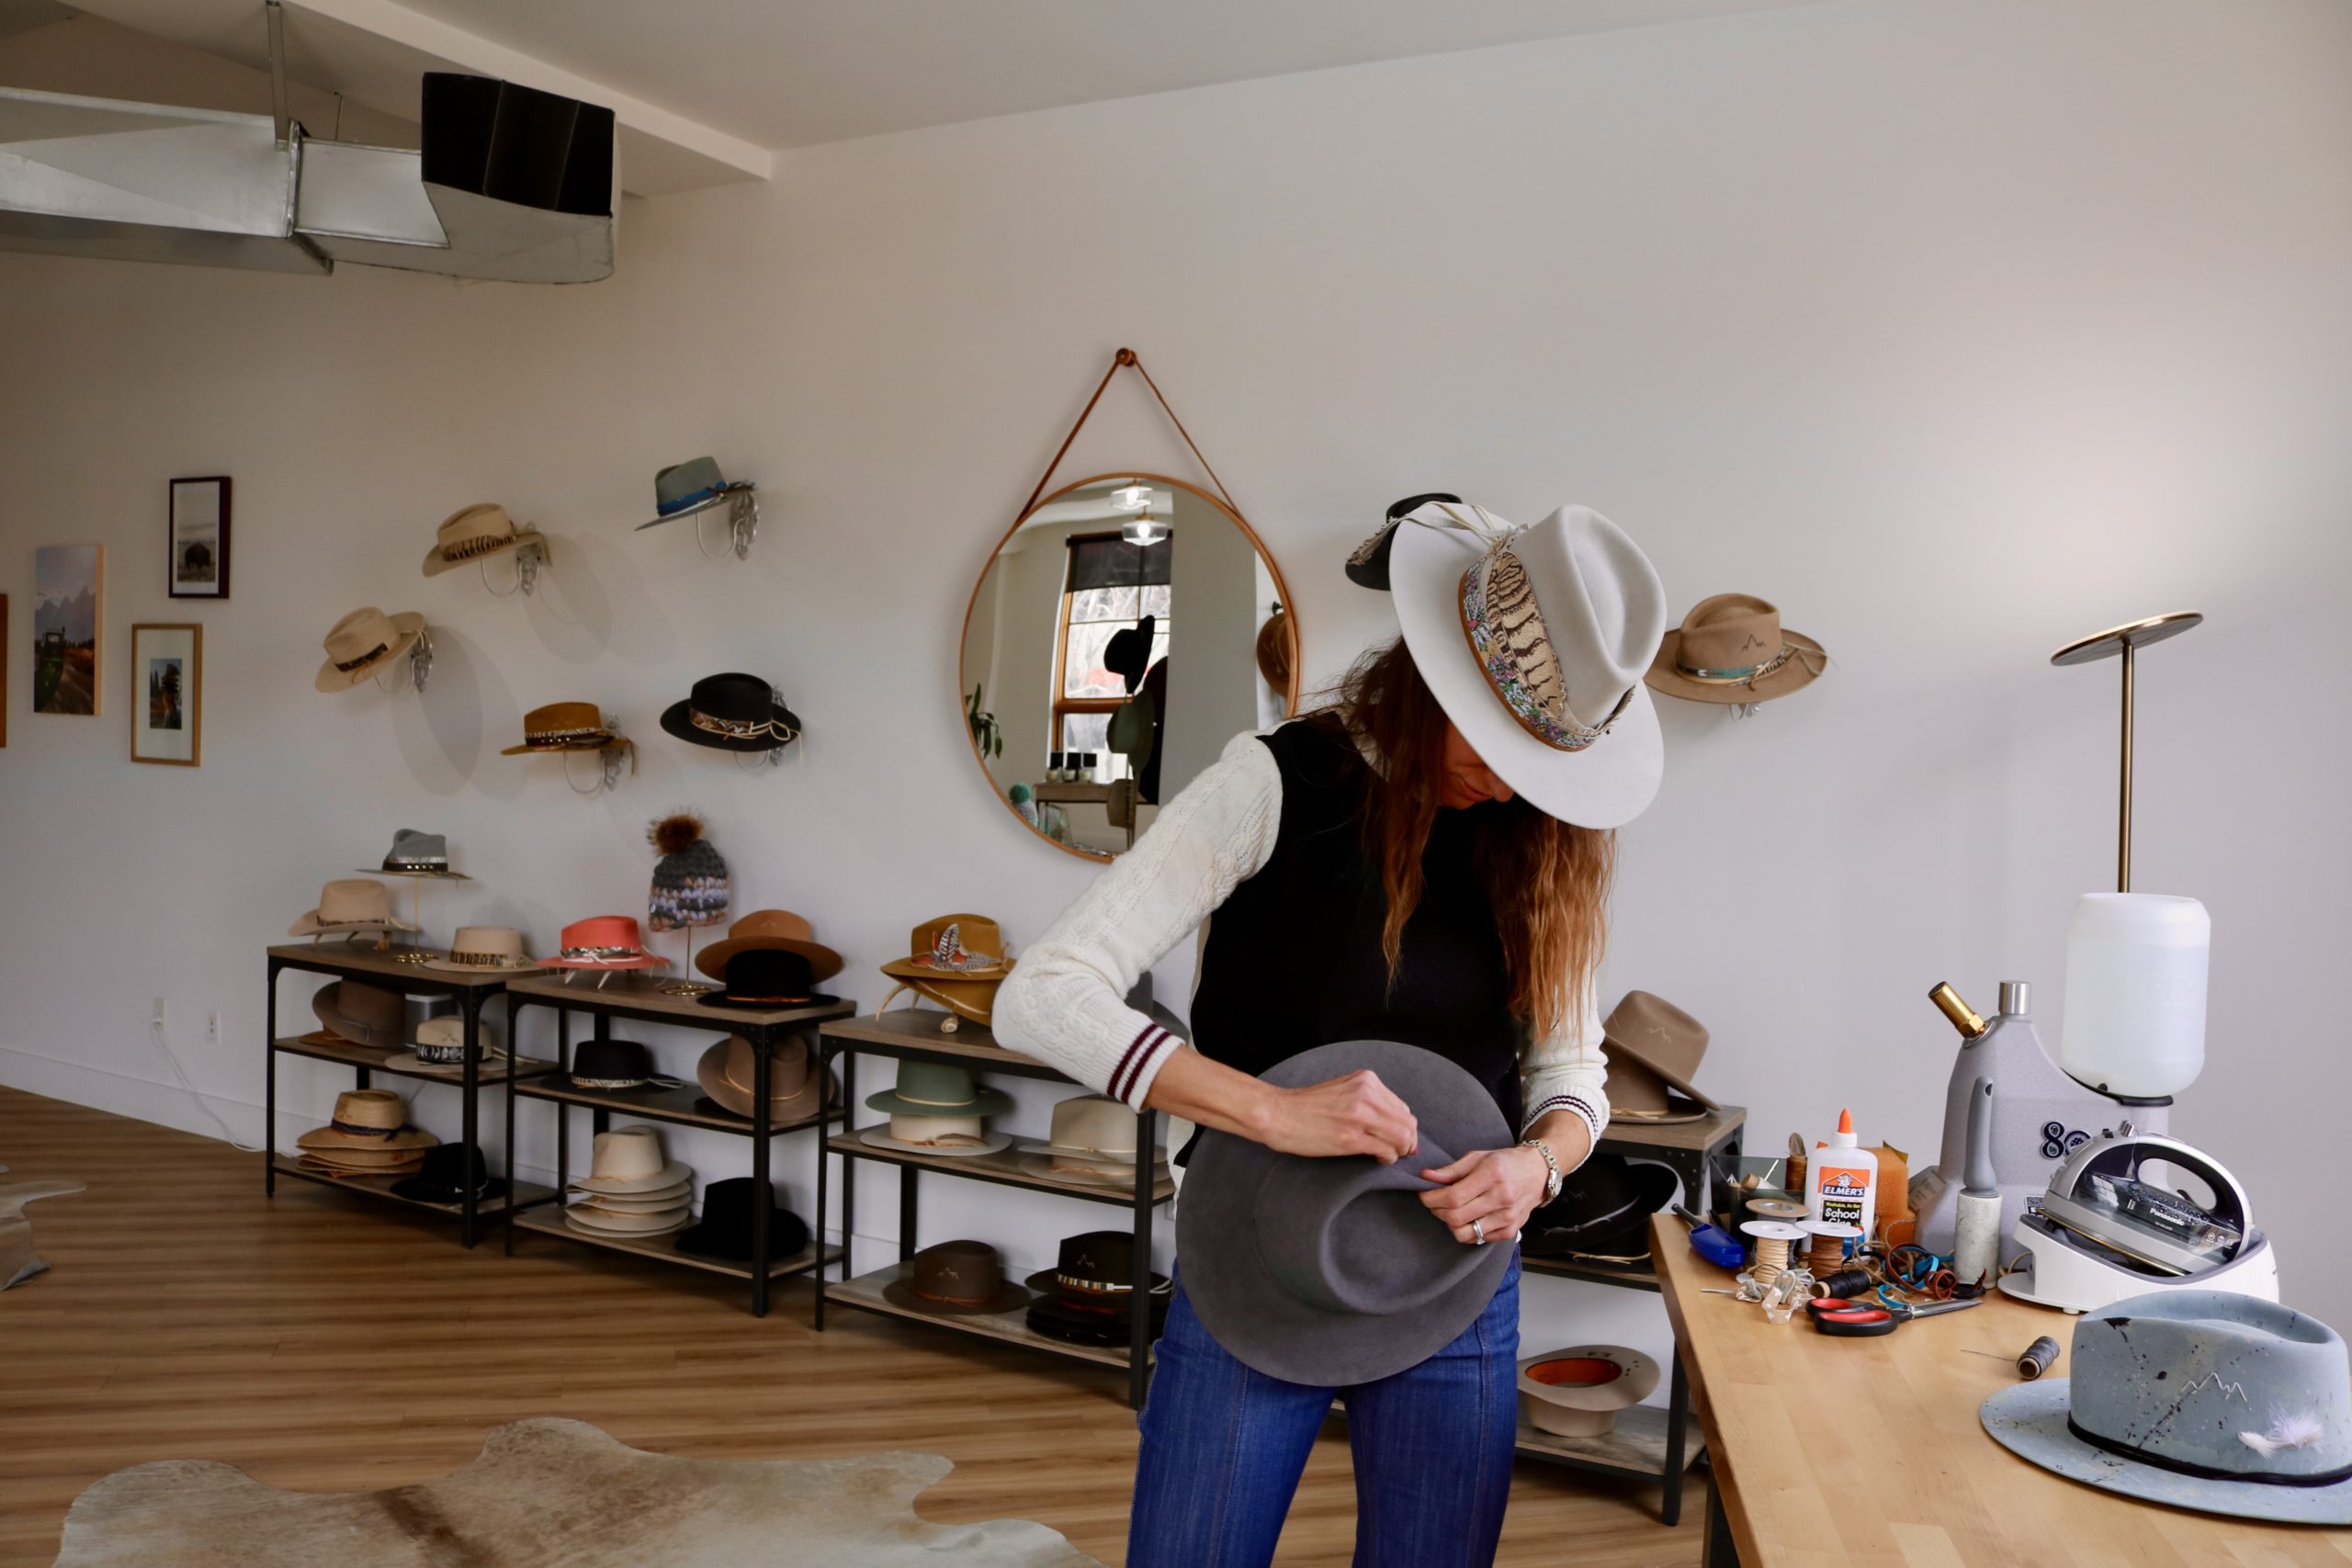 While Sarah makes the hats, Lara still gets creative by hand-stitching the mountain logo, adding bands and accessories, and fire-distressing hats.